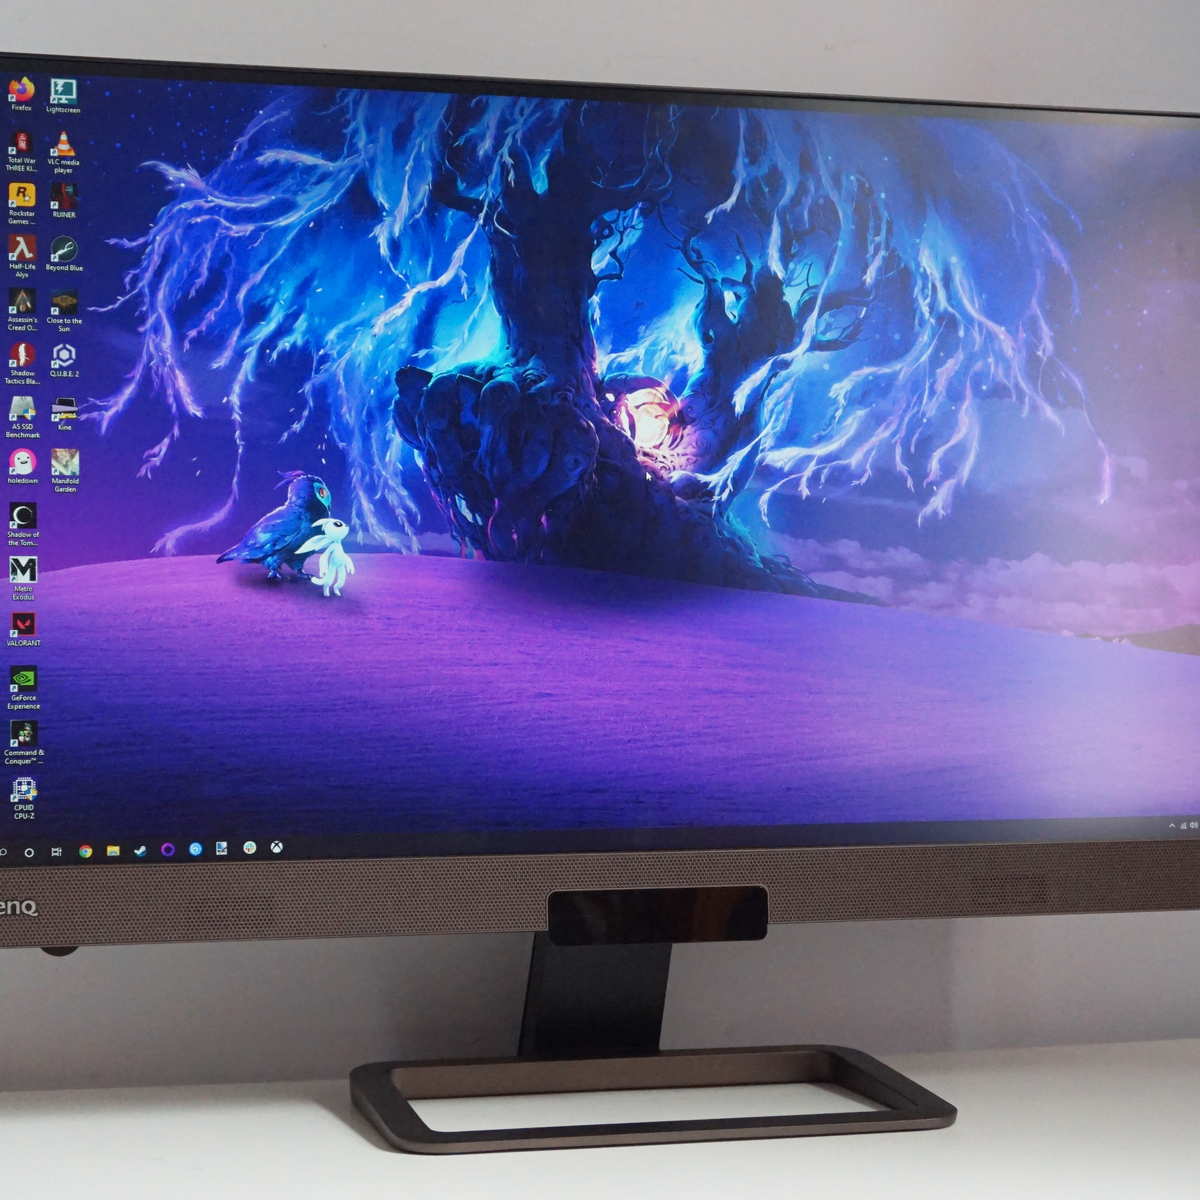 BenQ EX2780Q review: a great 144Hz gaming monitor with one major flaw